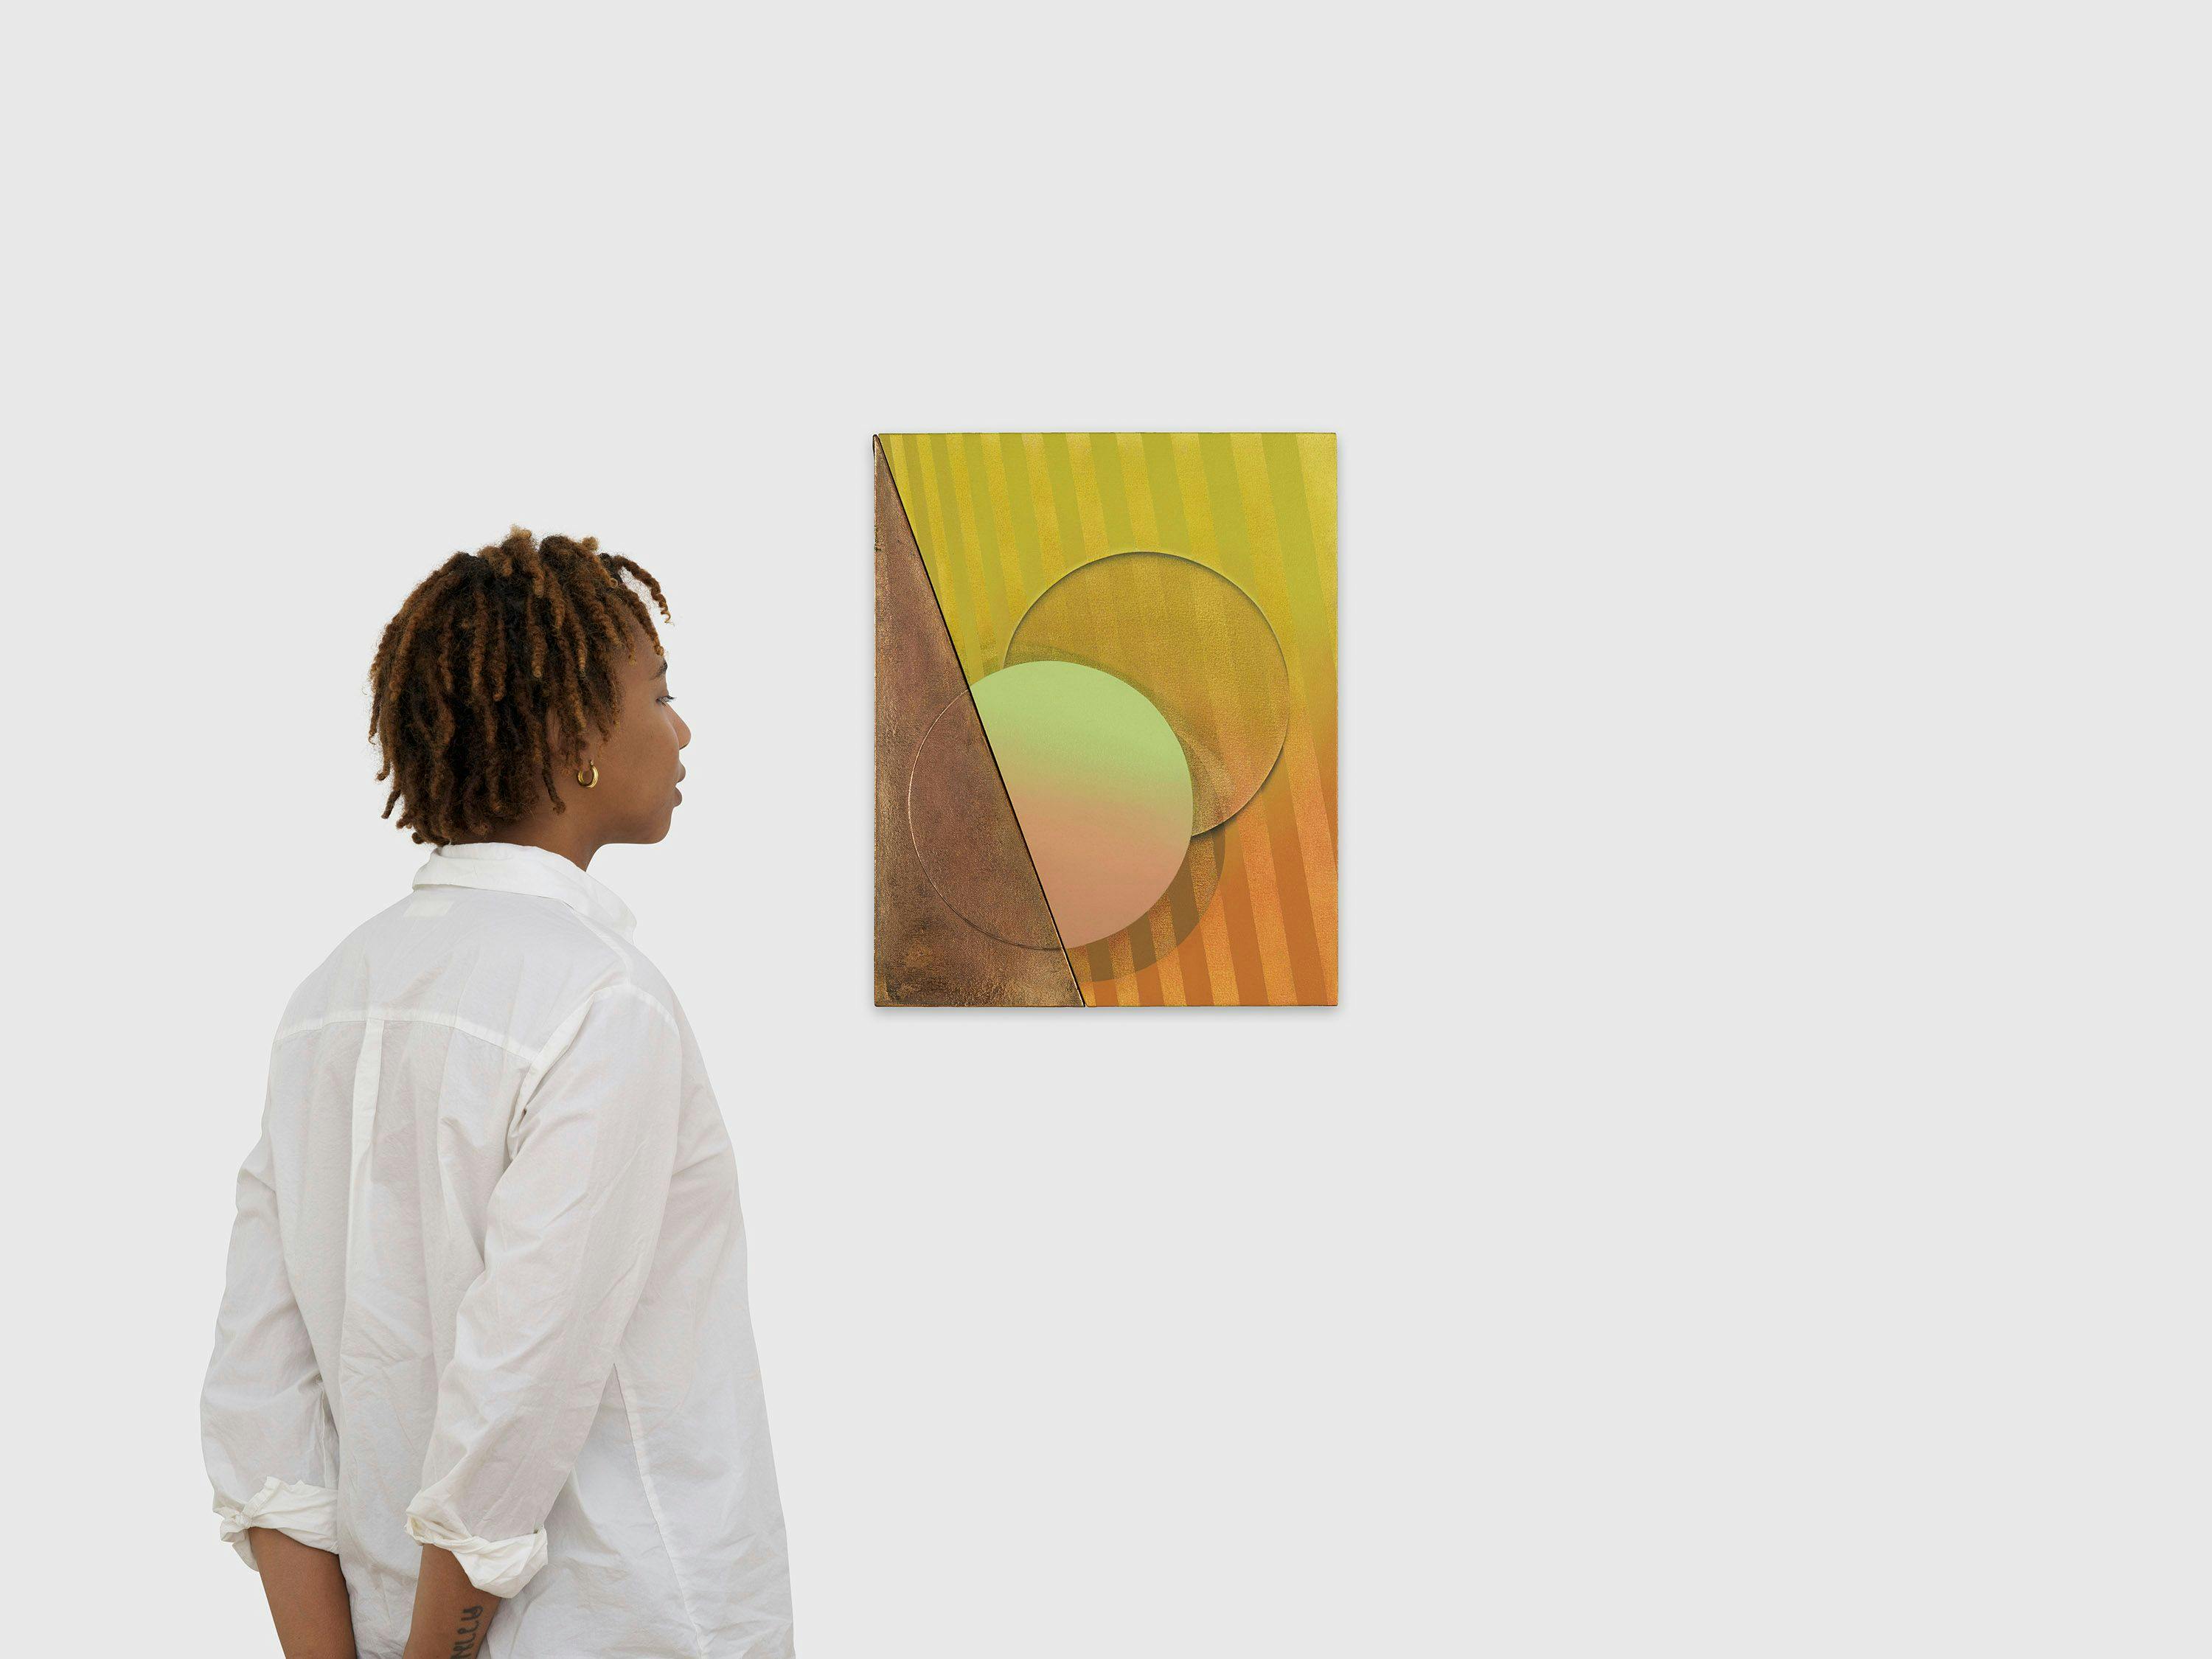 A painting by Tomma Abts, titled Konke, dated 2024.